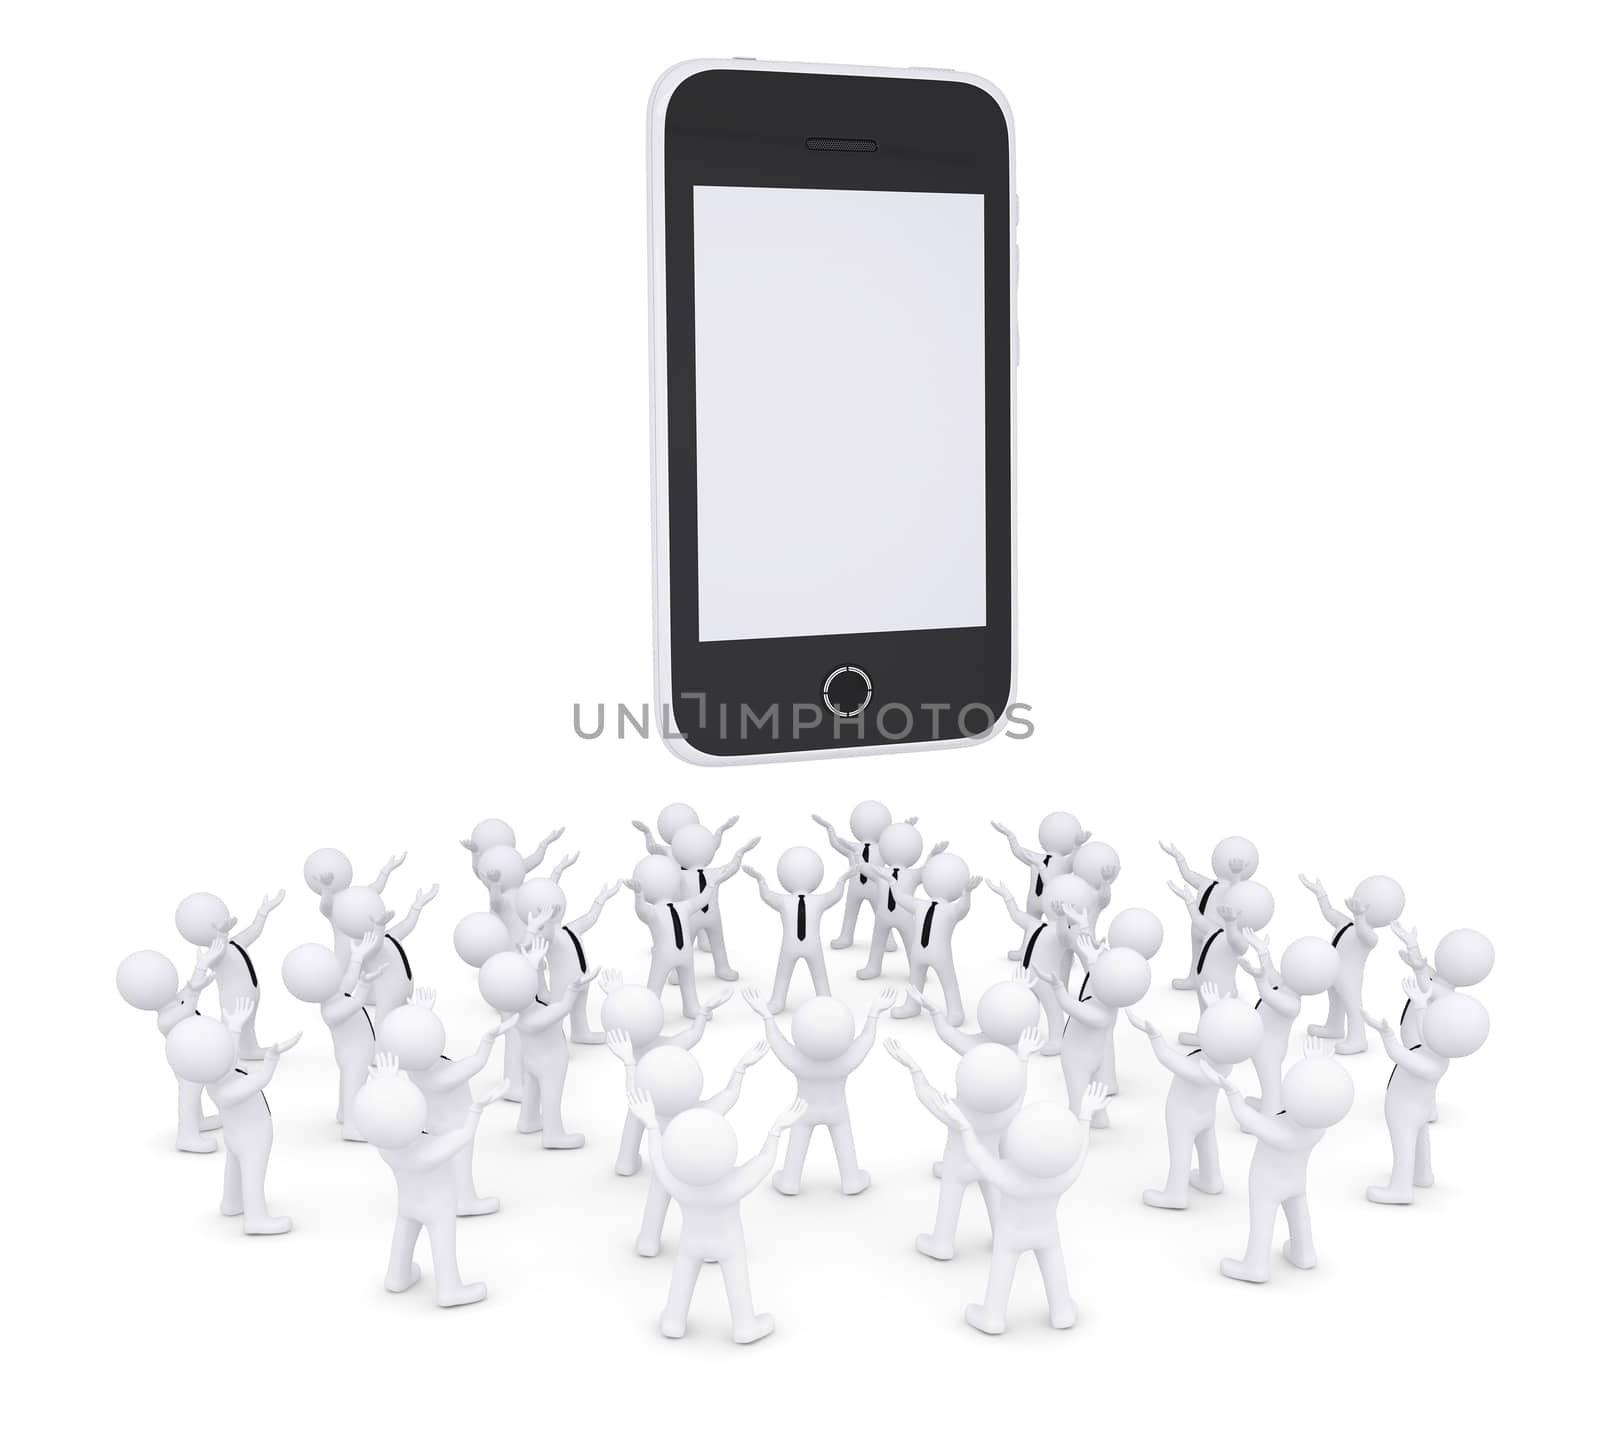 Group of white people worshiping smartphone. 3d render isolated on white background